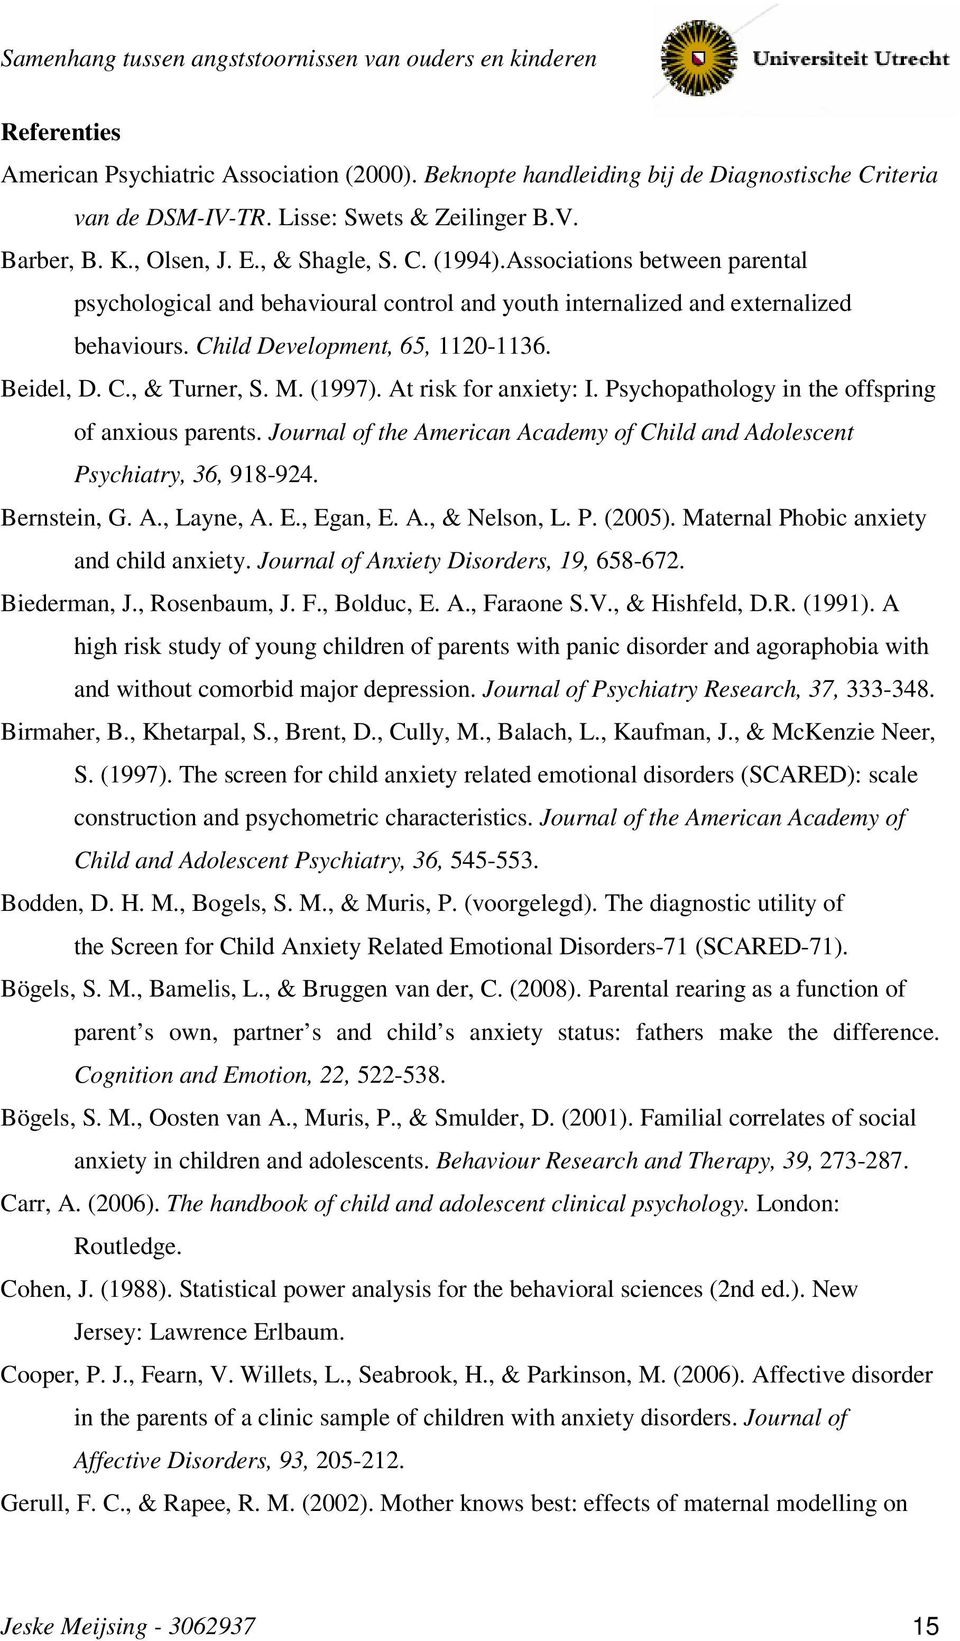 At risk for anxiety: I. Psychopathology in the offspring of anxious parents. Journal of the American Academy of Child and Adolescent Psychiatry, 36, 918-924. Bernstein, G. A., Layne, A. E., Egan, E.